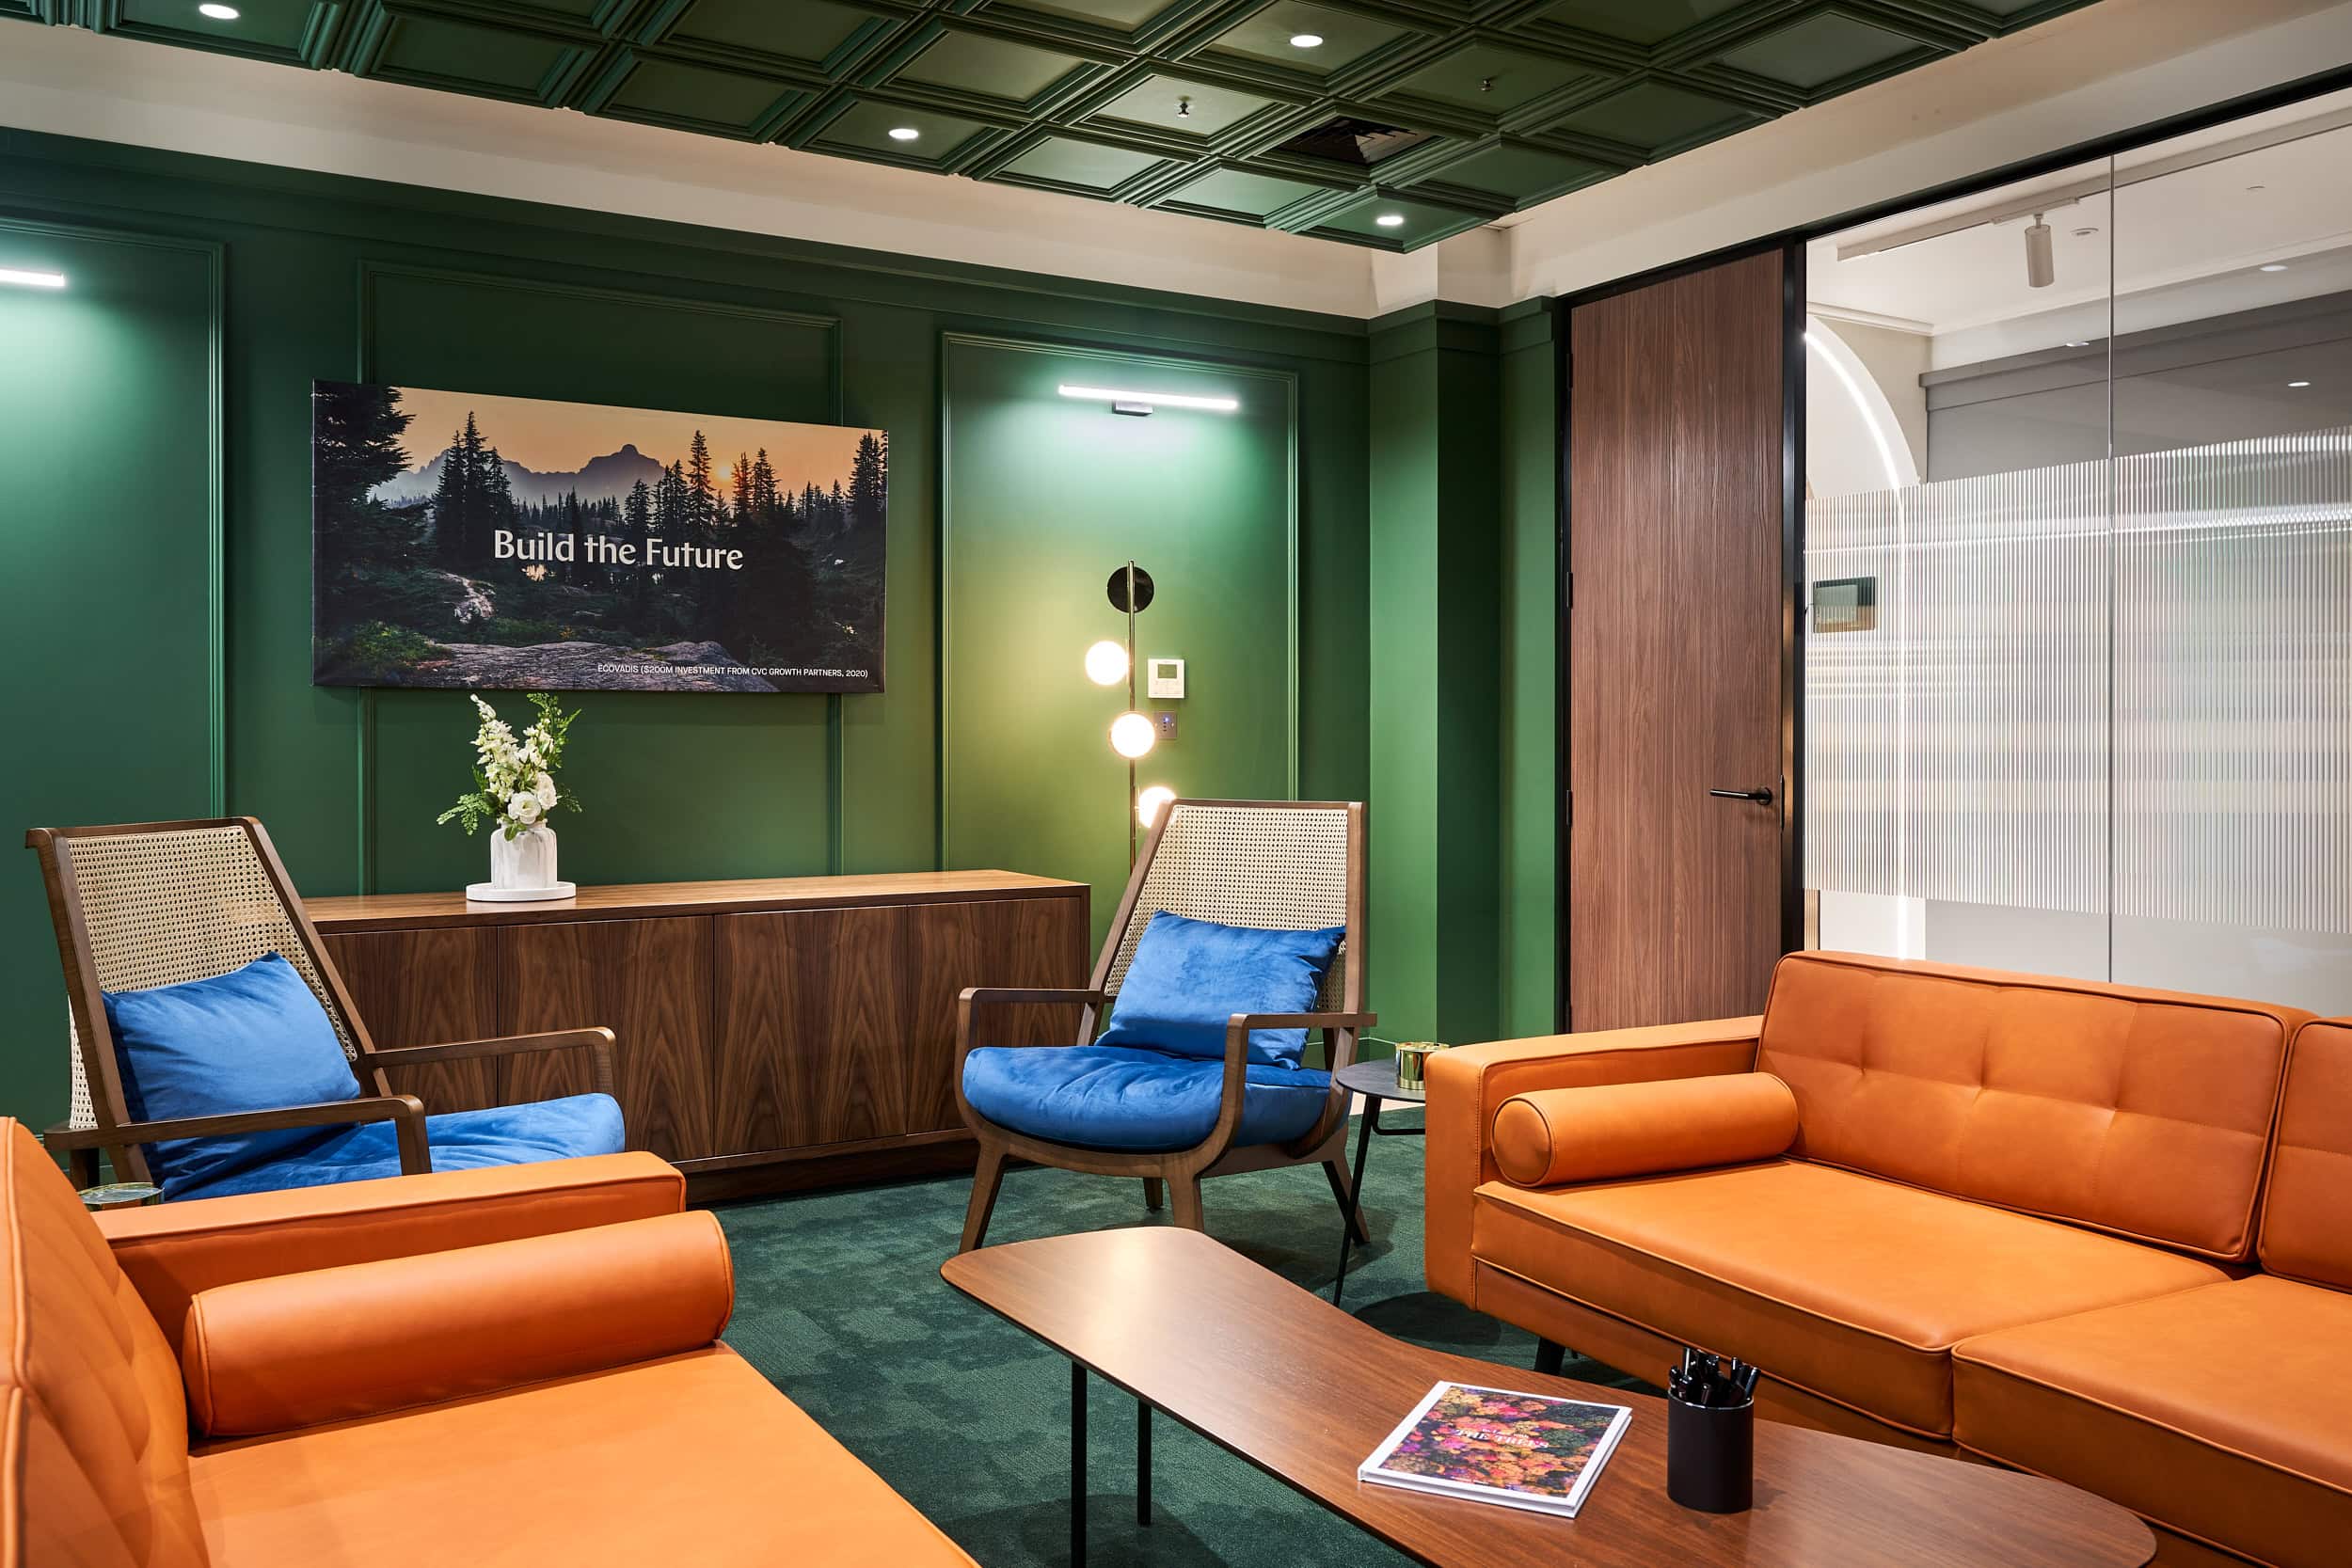 Office furniture by AIS, meeting room with two tan leather sofas and mid-century style coffee table.